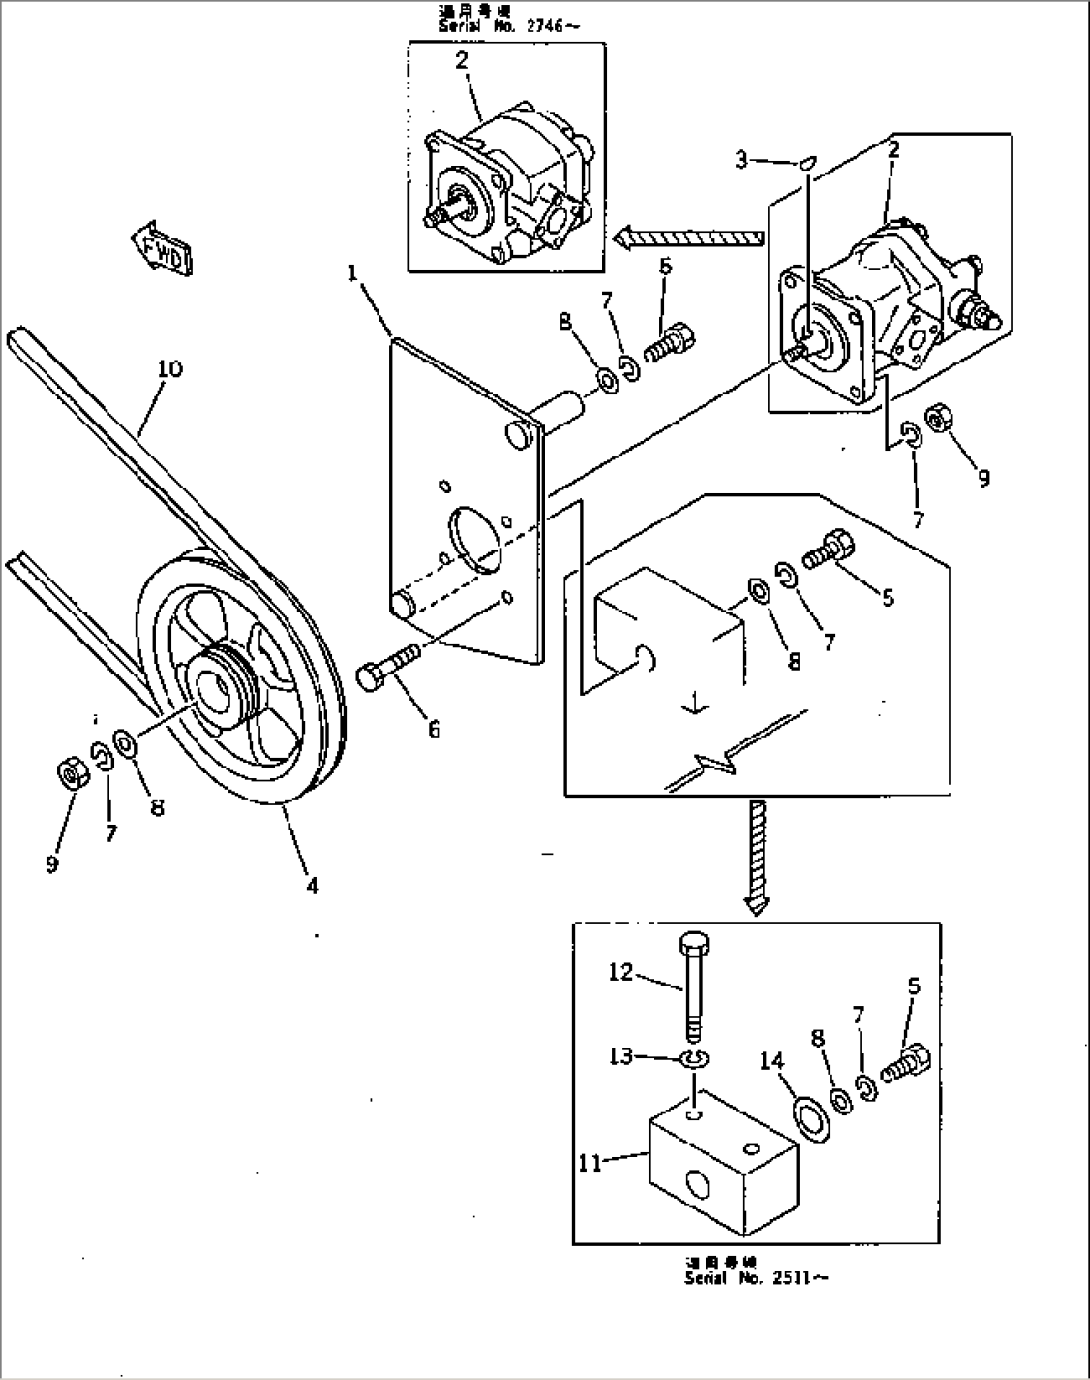 STEERING PUMP AND RELATED PARTS